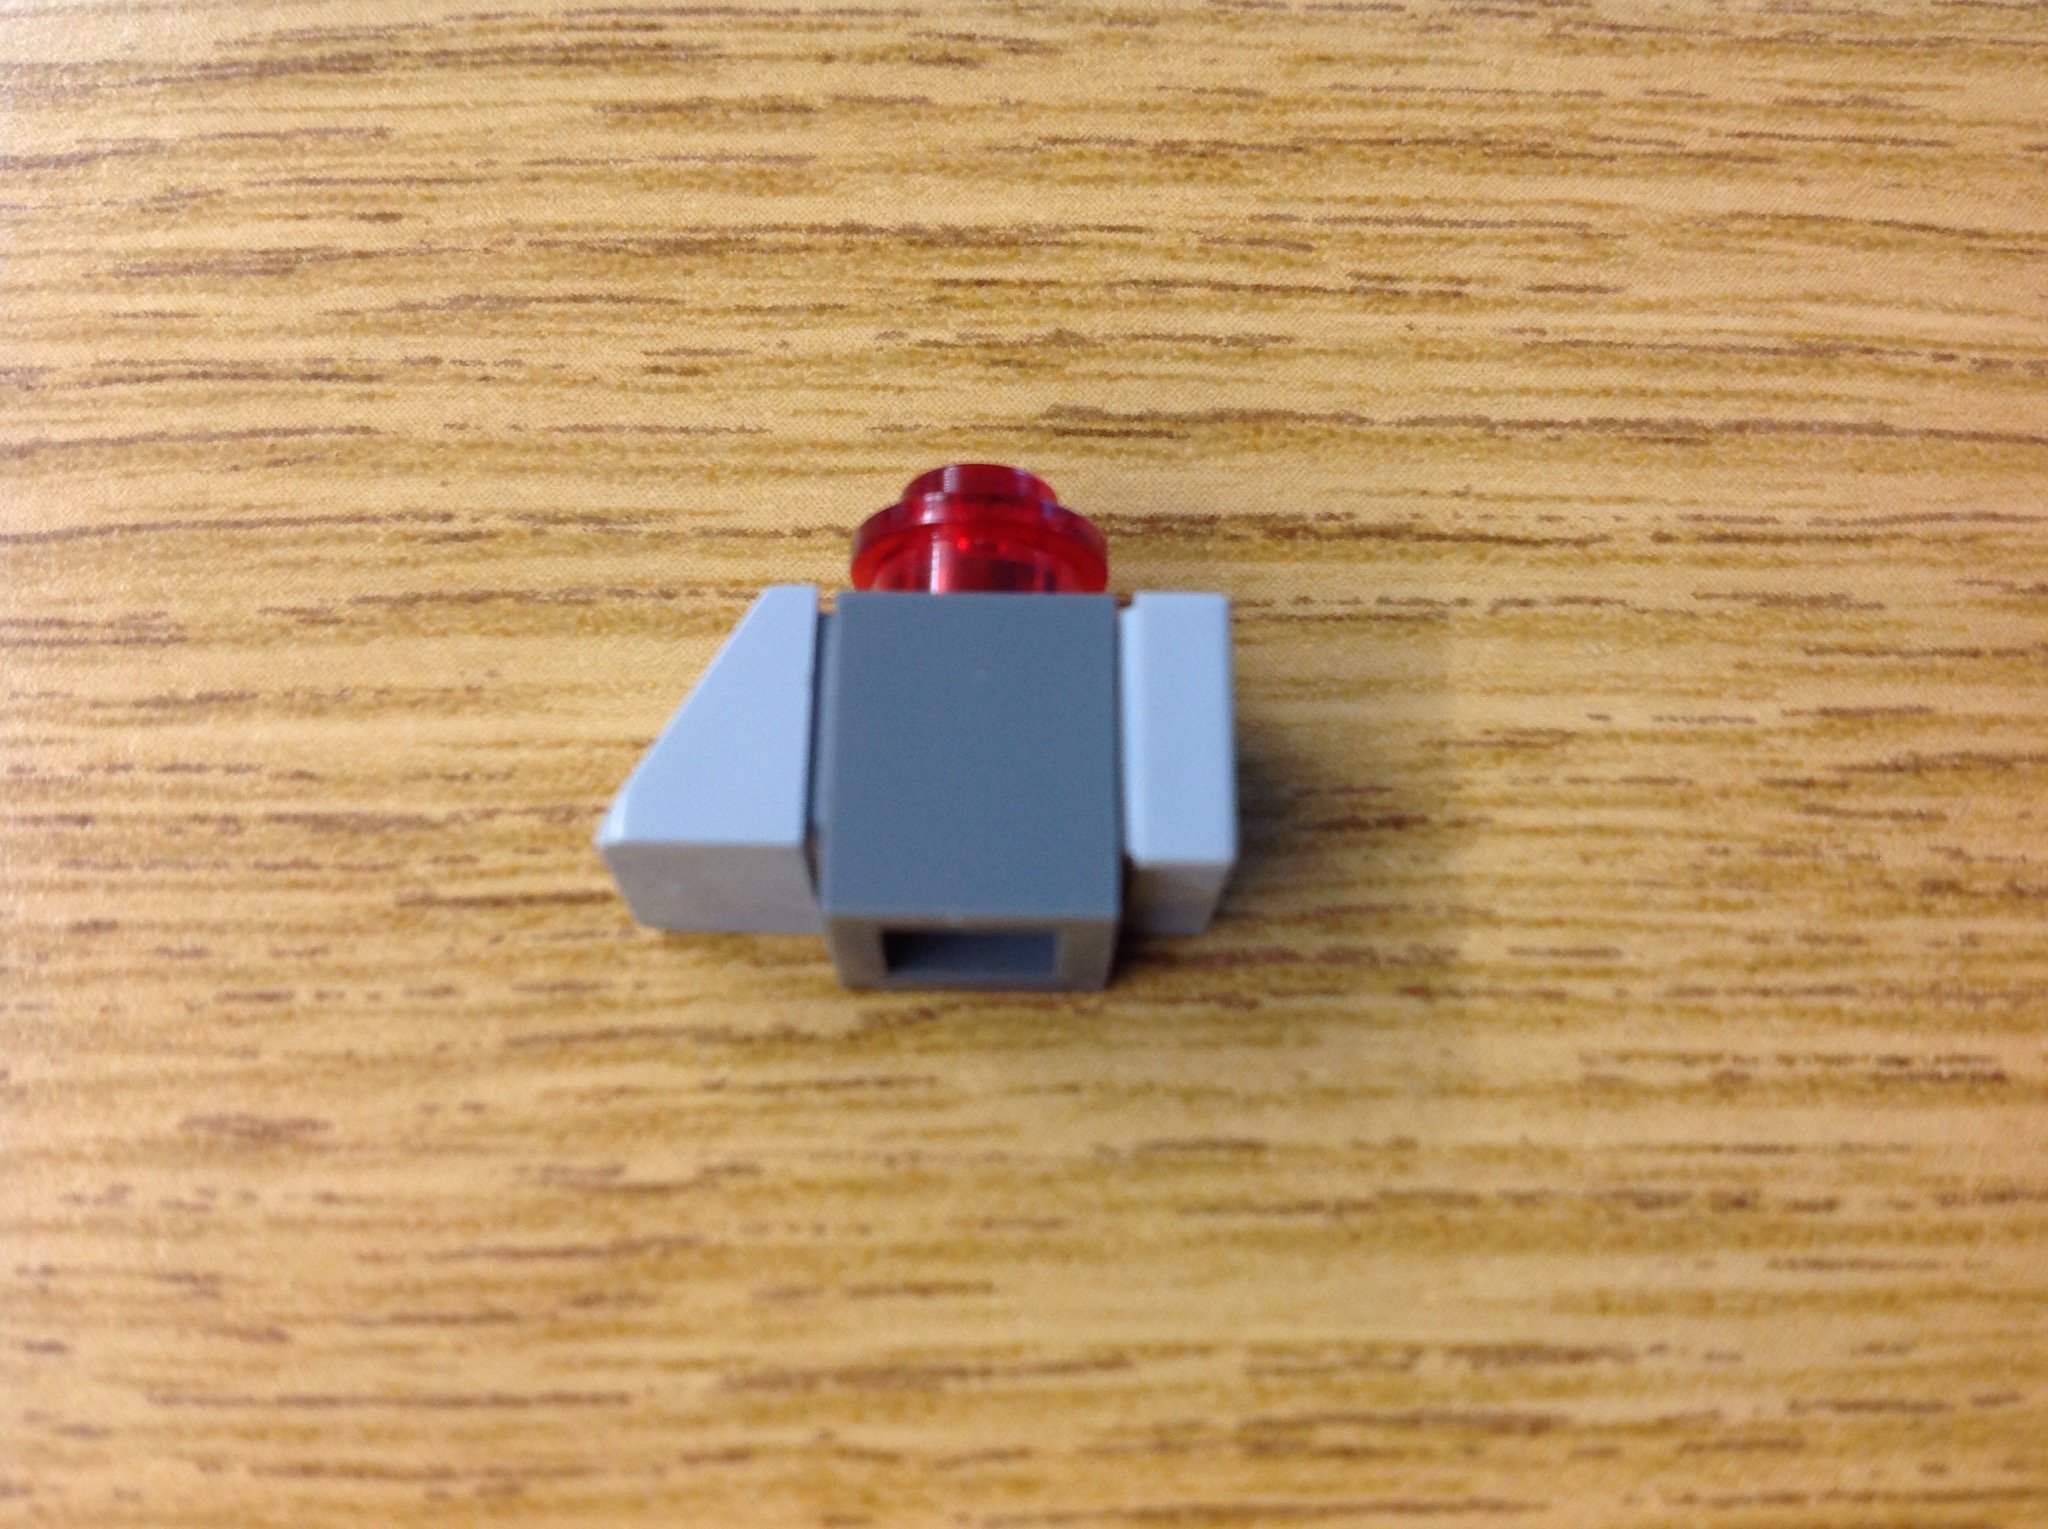 How to build a small lego -